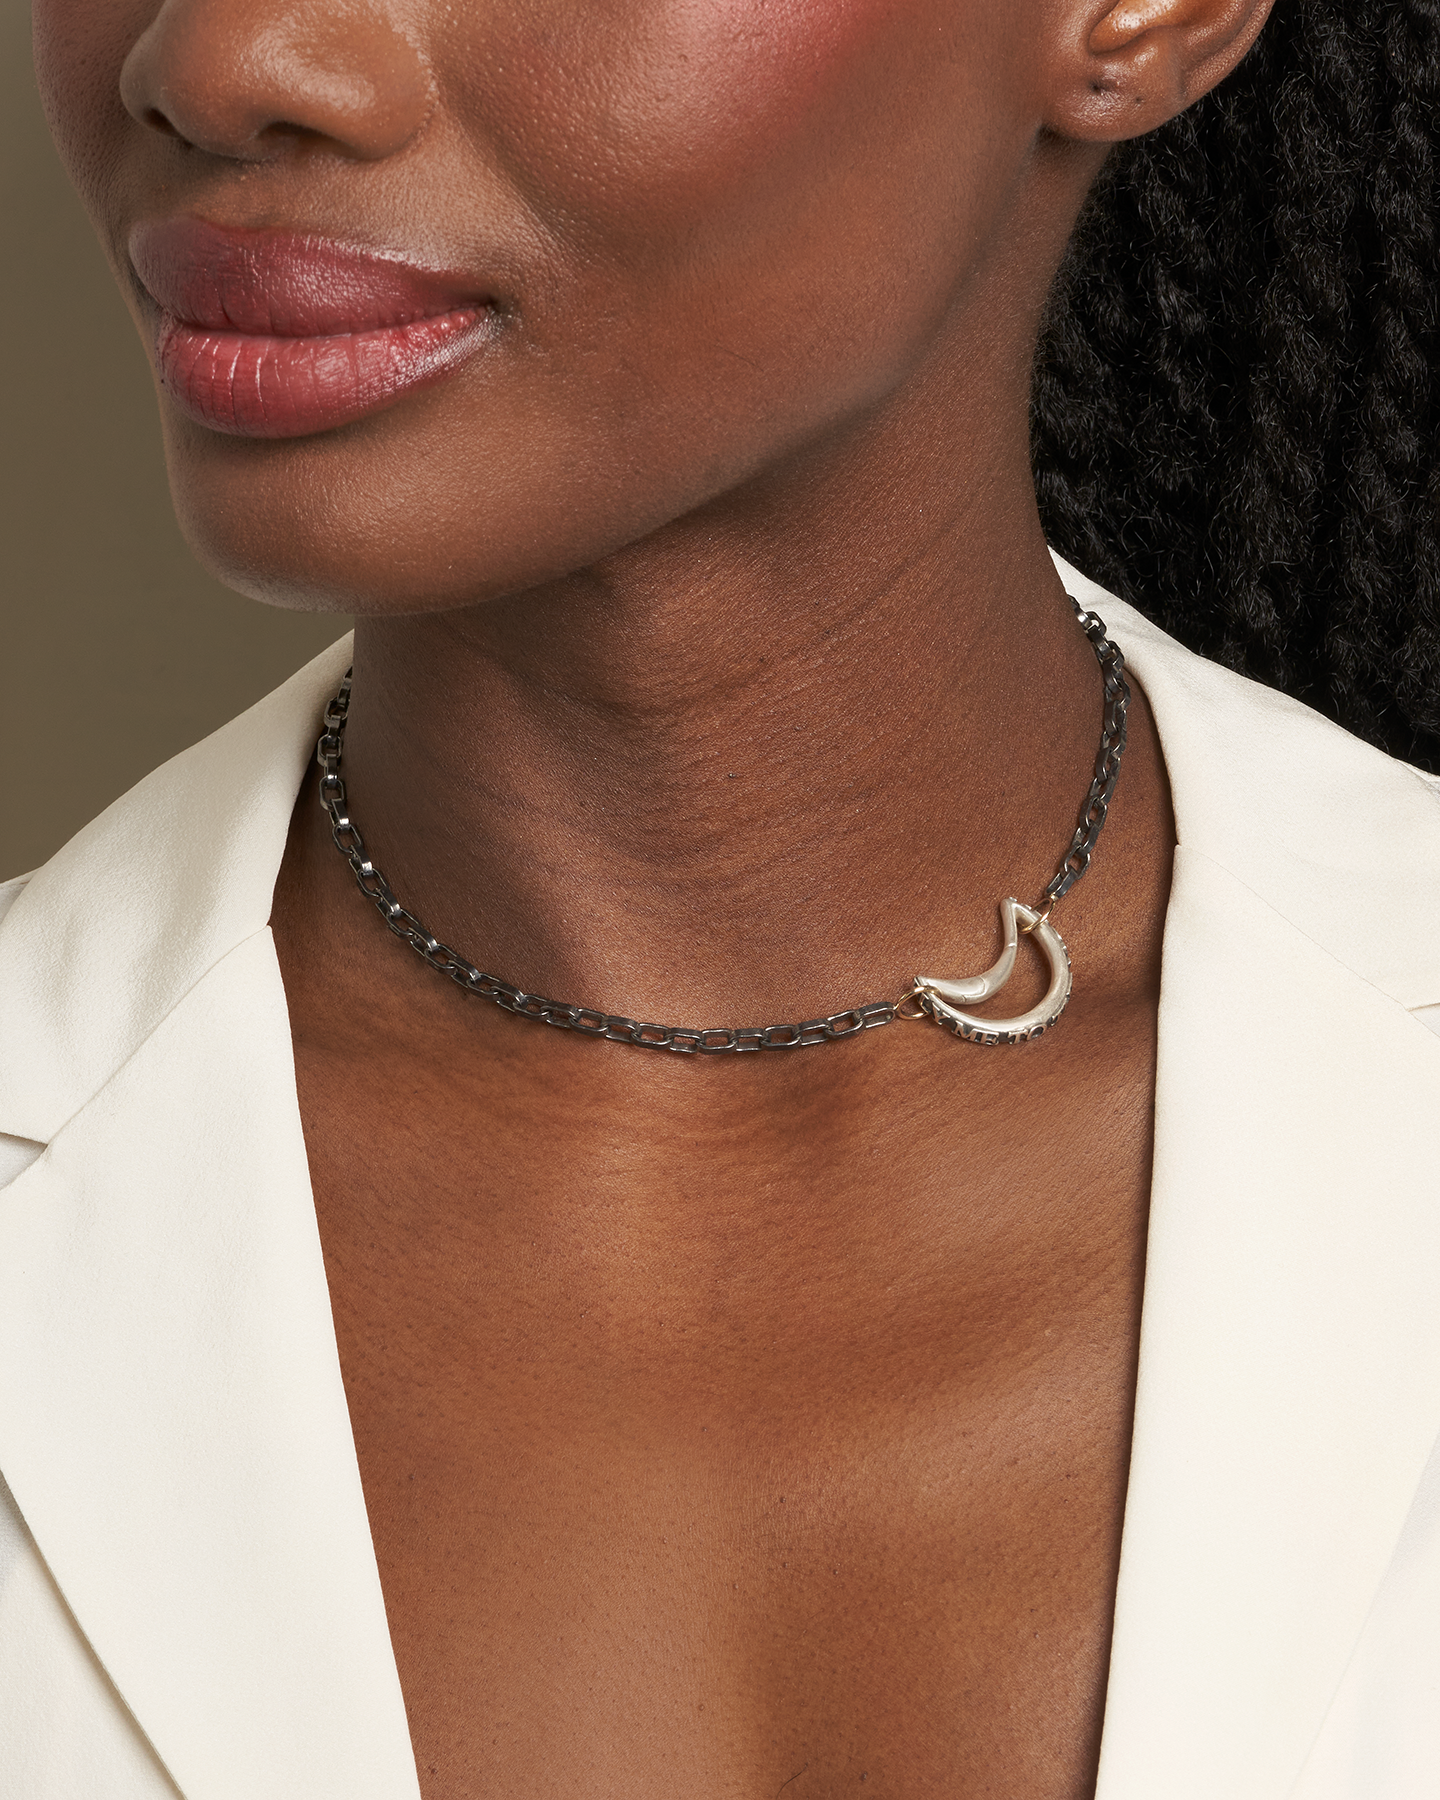 Close up of woman's side-facing decolletage wearing fly me to the moon necklace